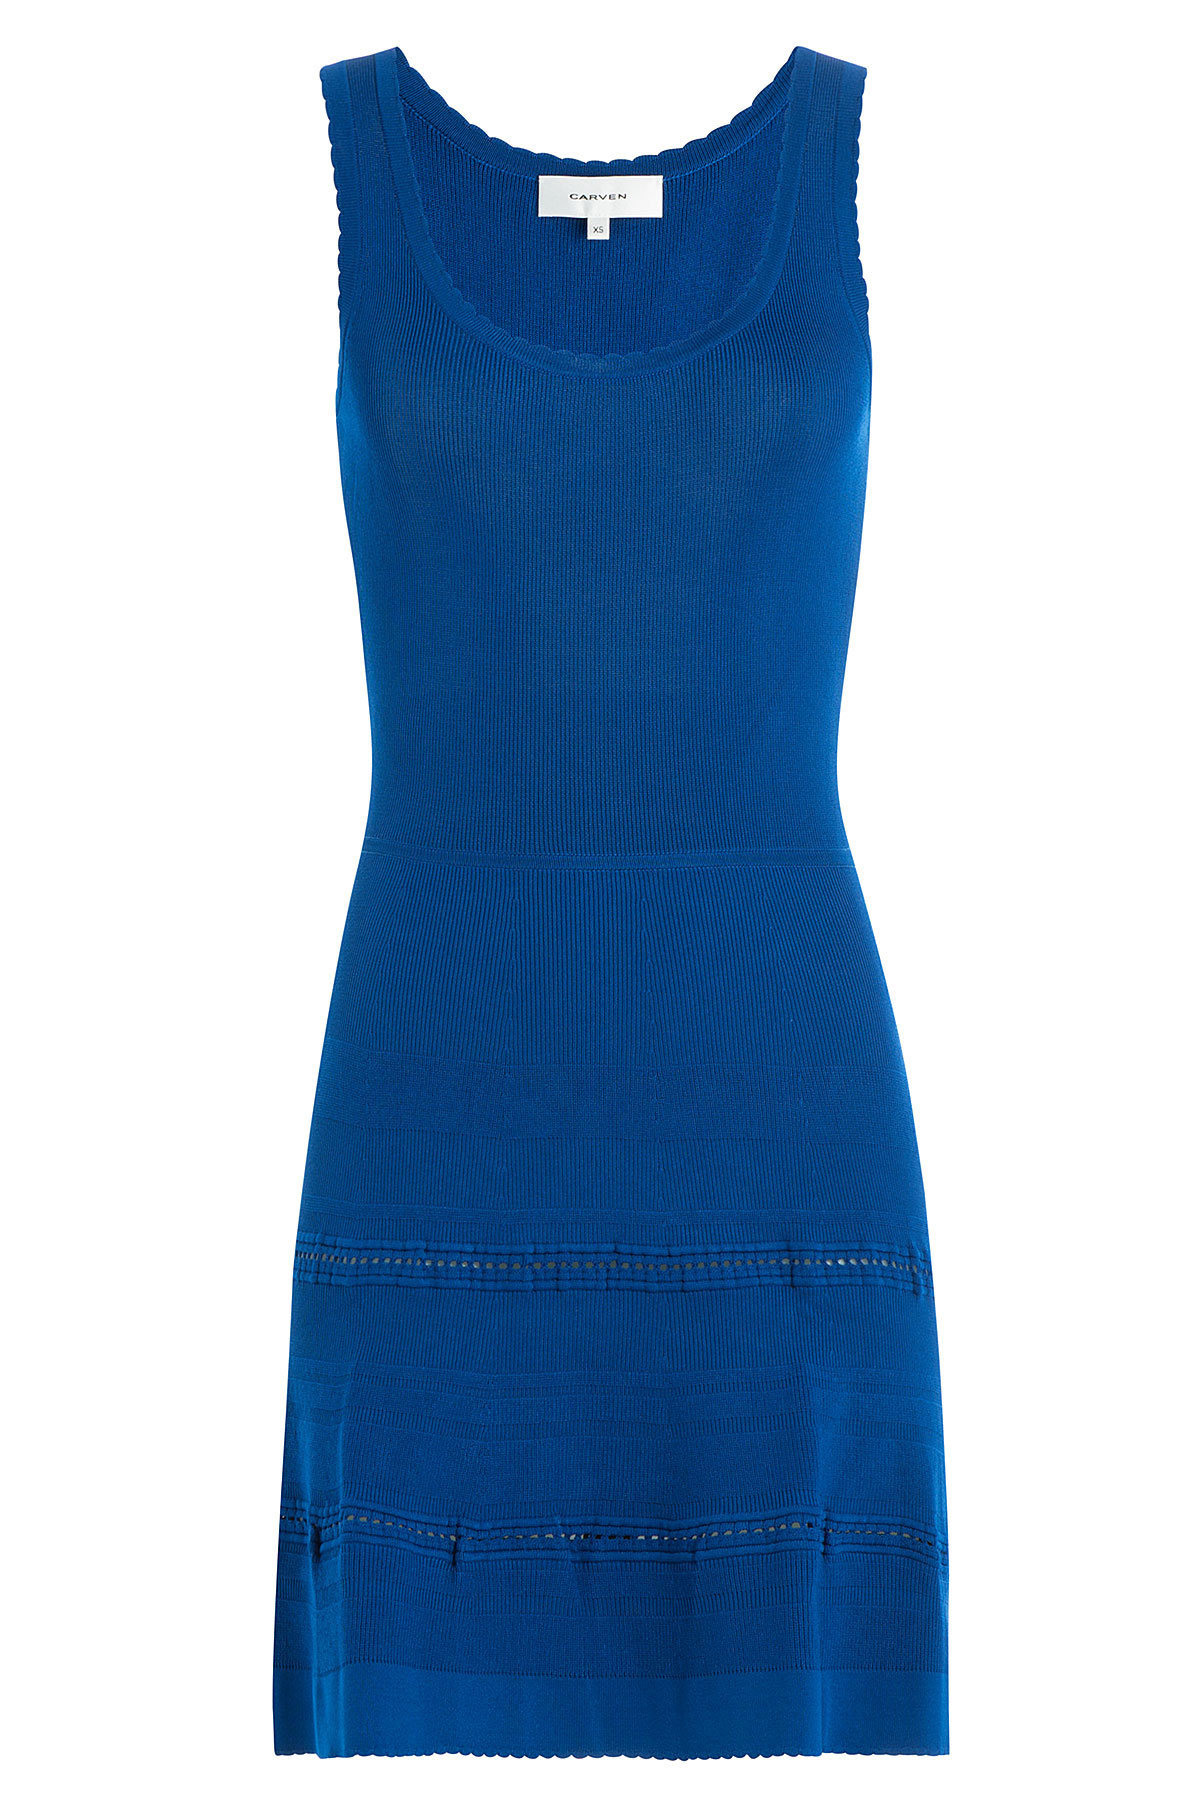 Carven - Stretch Dress with Cut Out Detail